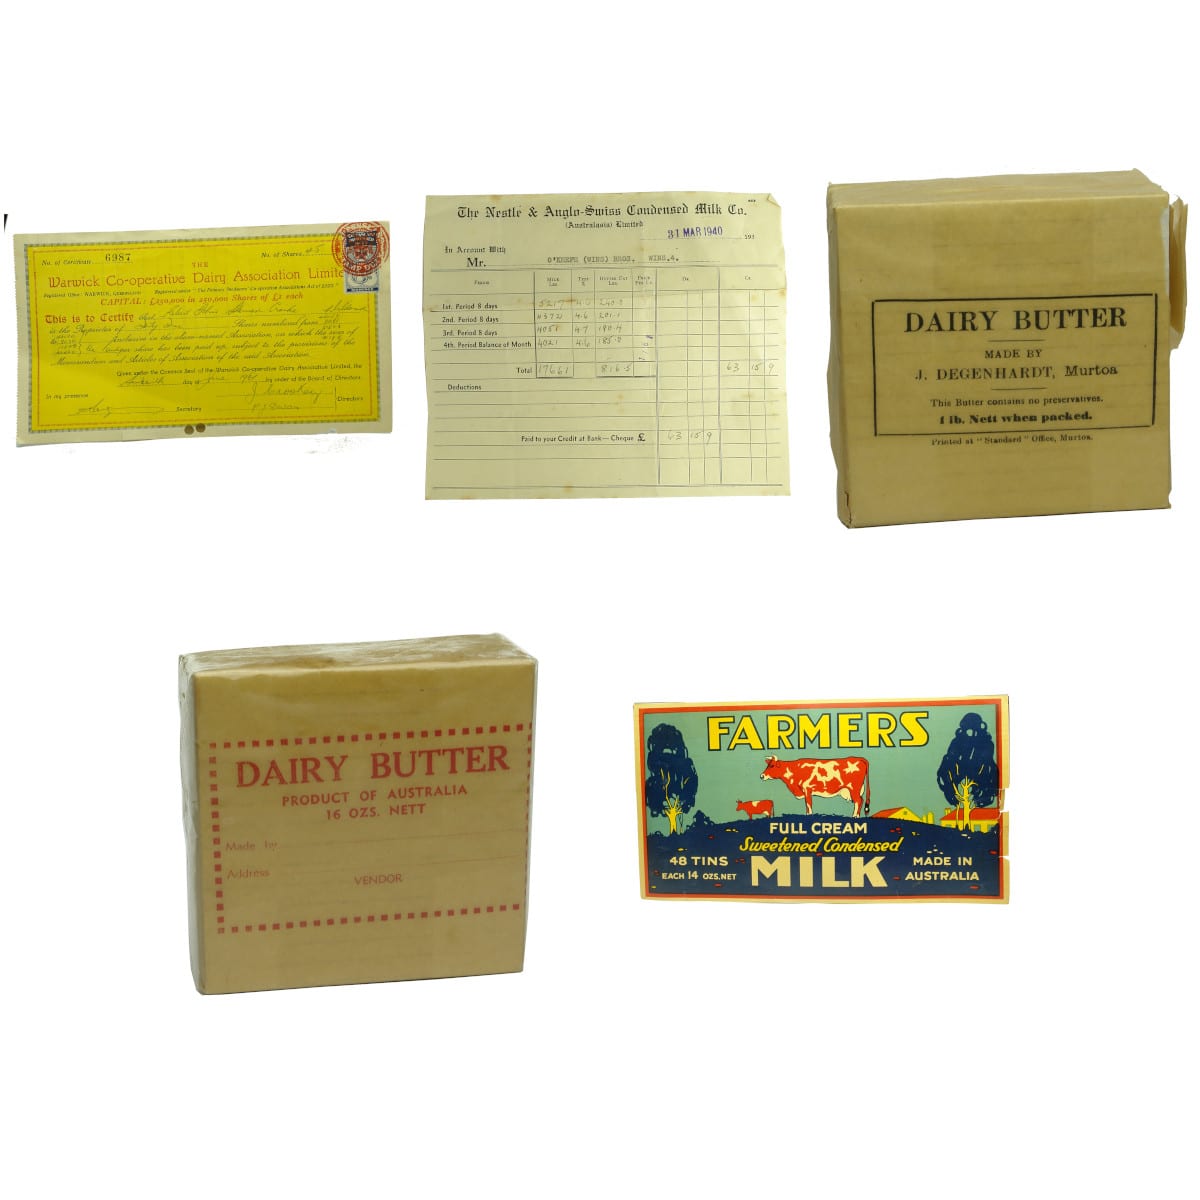 6 Items Dairy Ephemera. Share certificate Warwick Co-op Dairy. 1961. 2 Invoices The Nestle & Anglo-Swiss Condensed Milk Co. 2 Butter Labels: Generic & Degenhardt Maffra.; Farmers Condensed Milk label.